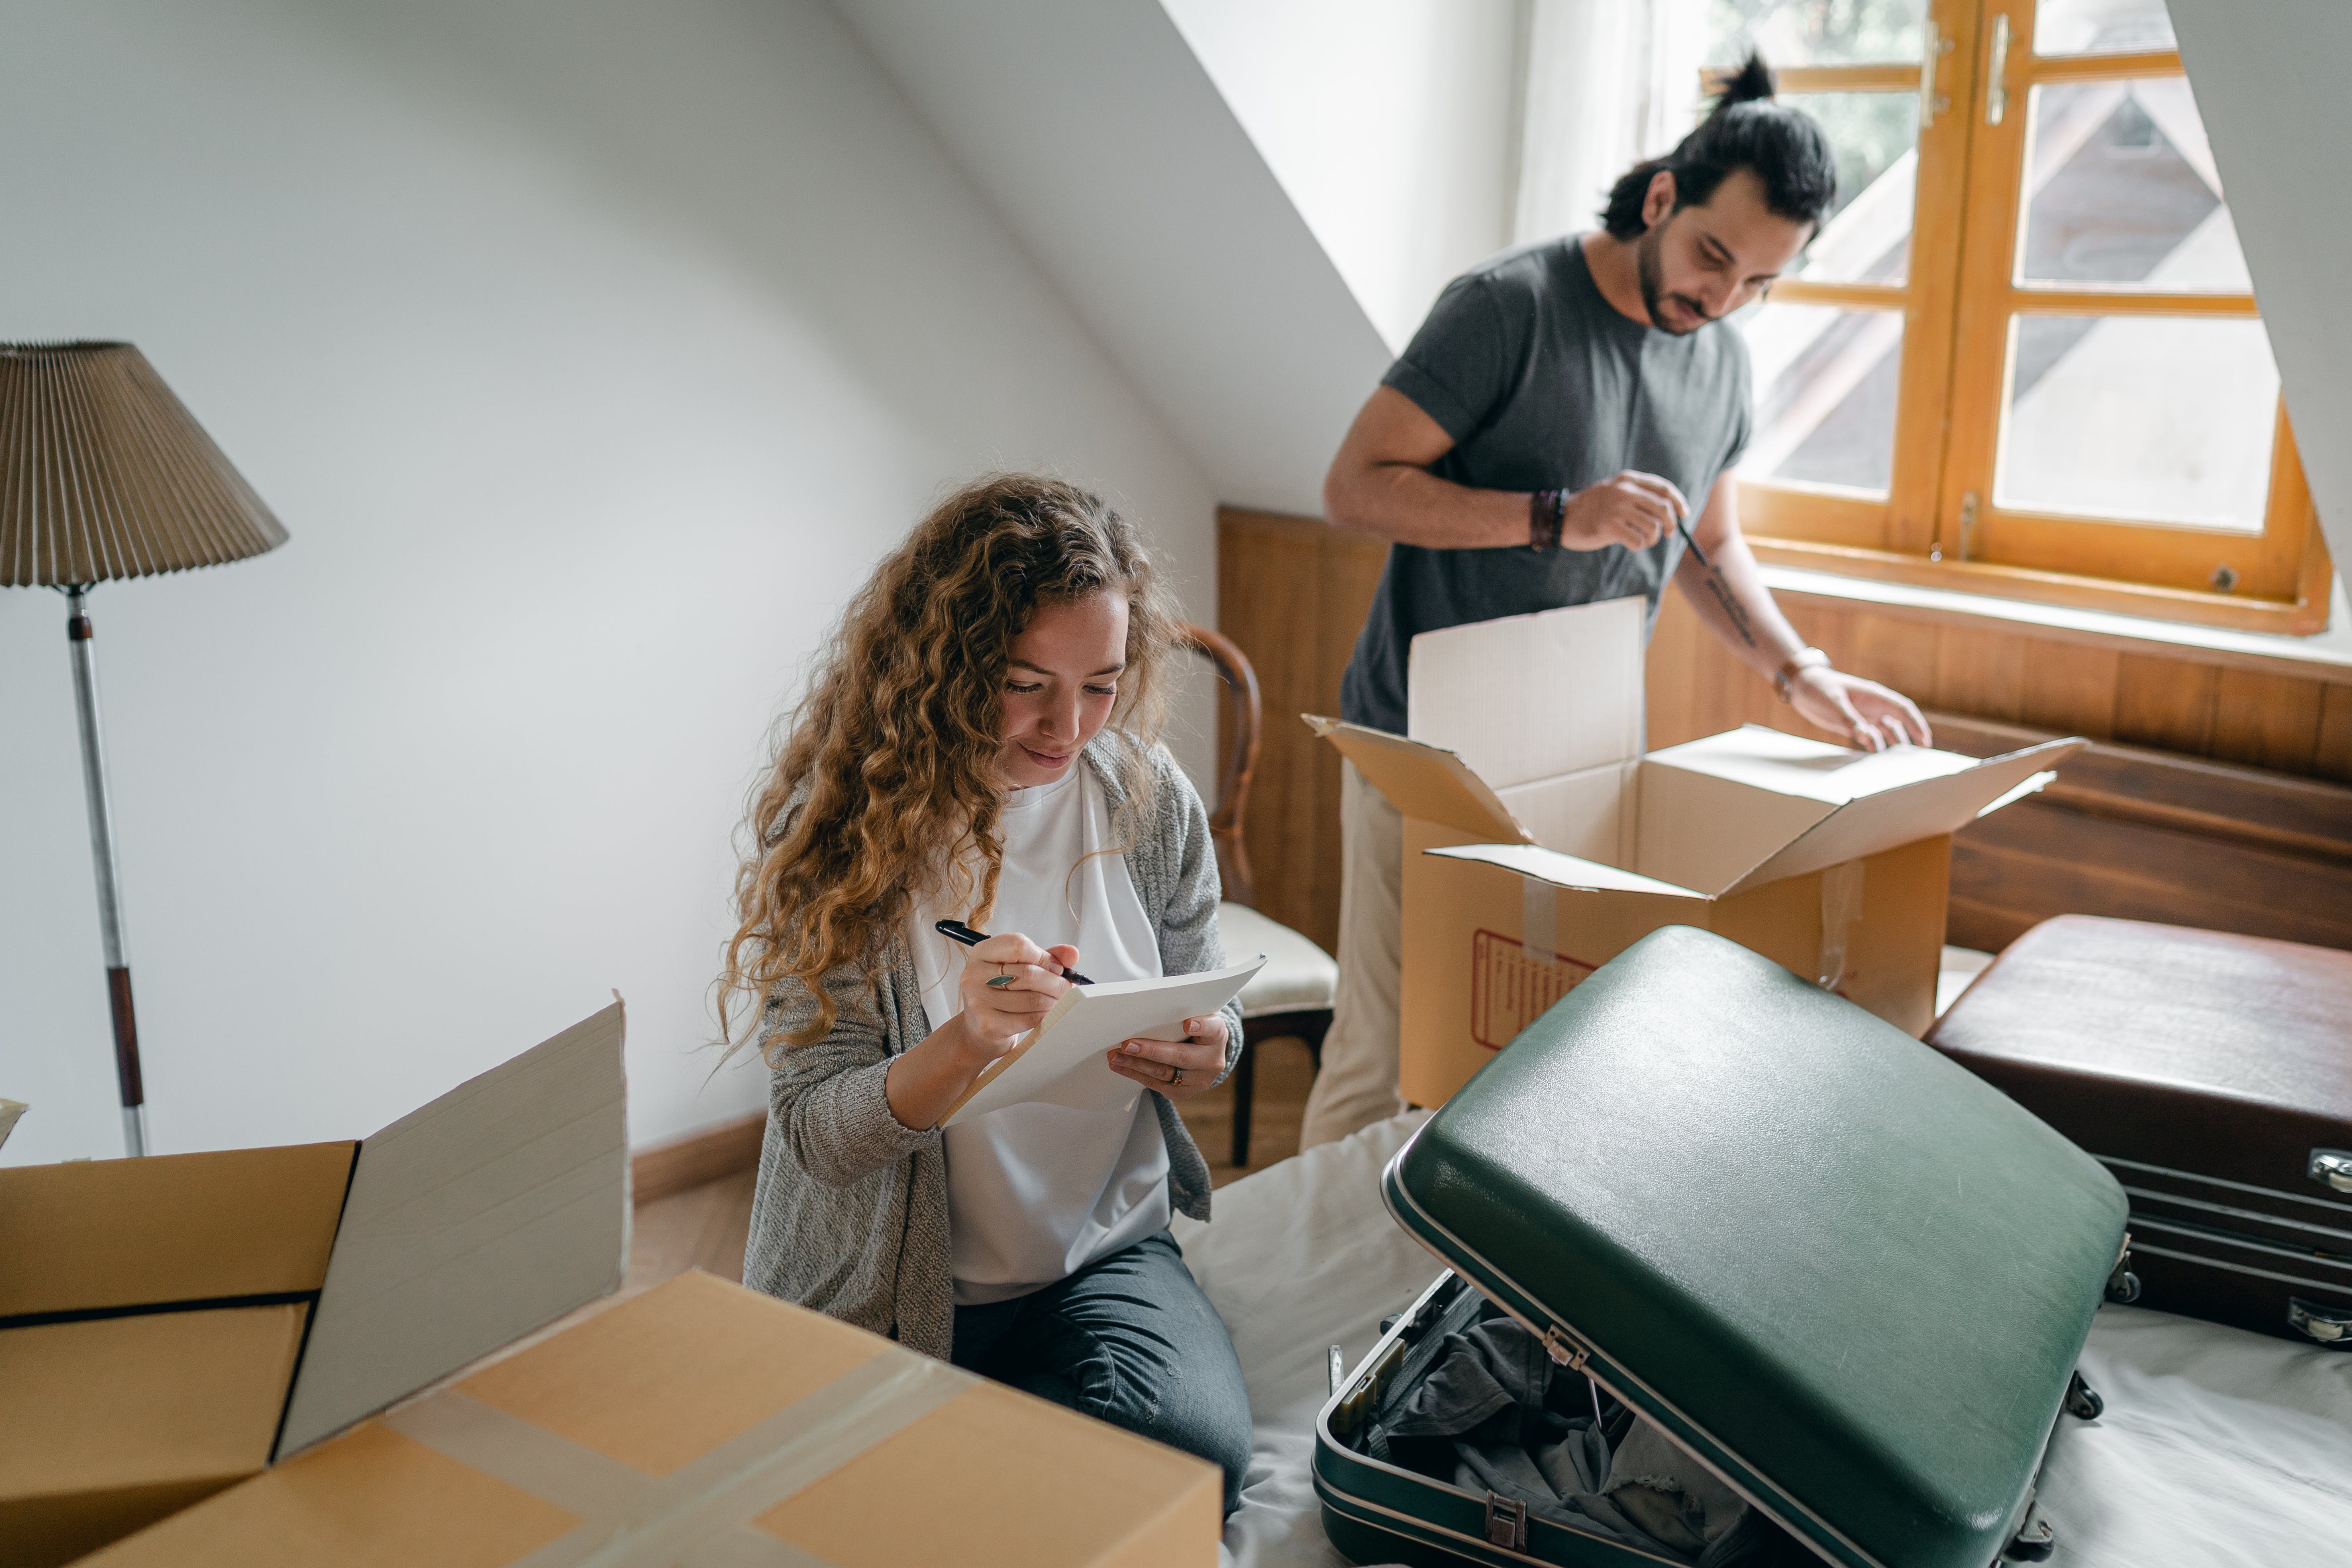 What to Expect from a Professional Move-Out Cleaning Service in San Antonio